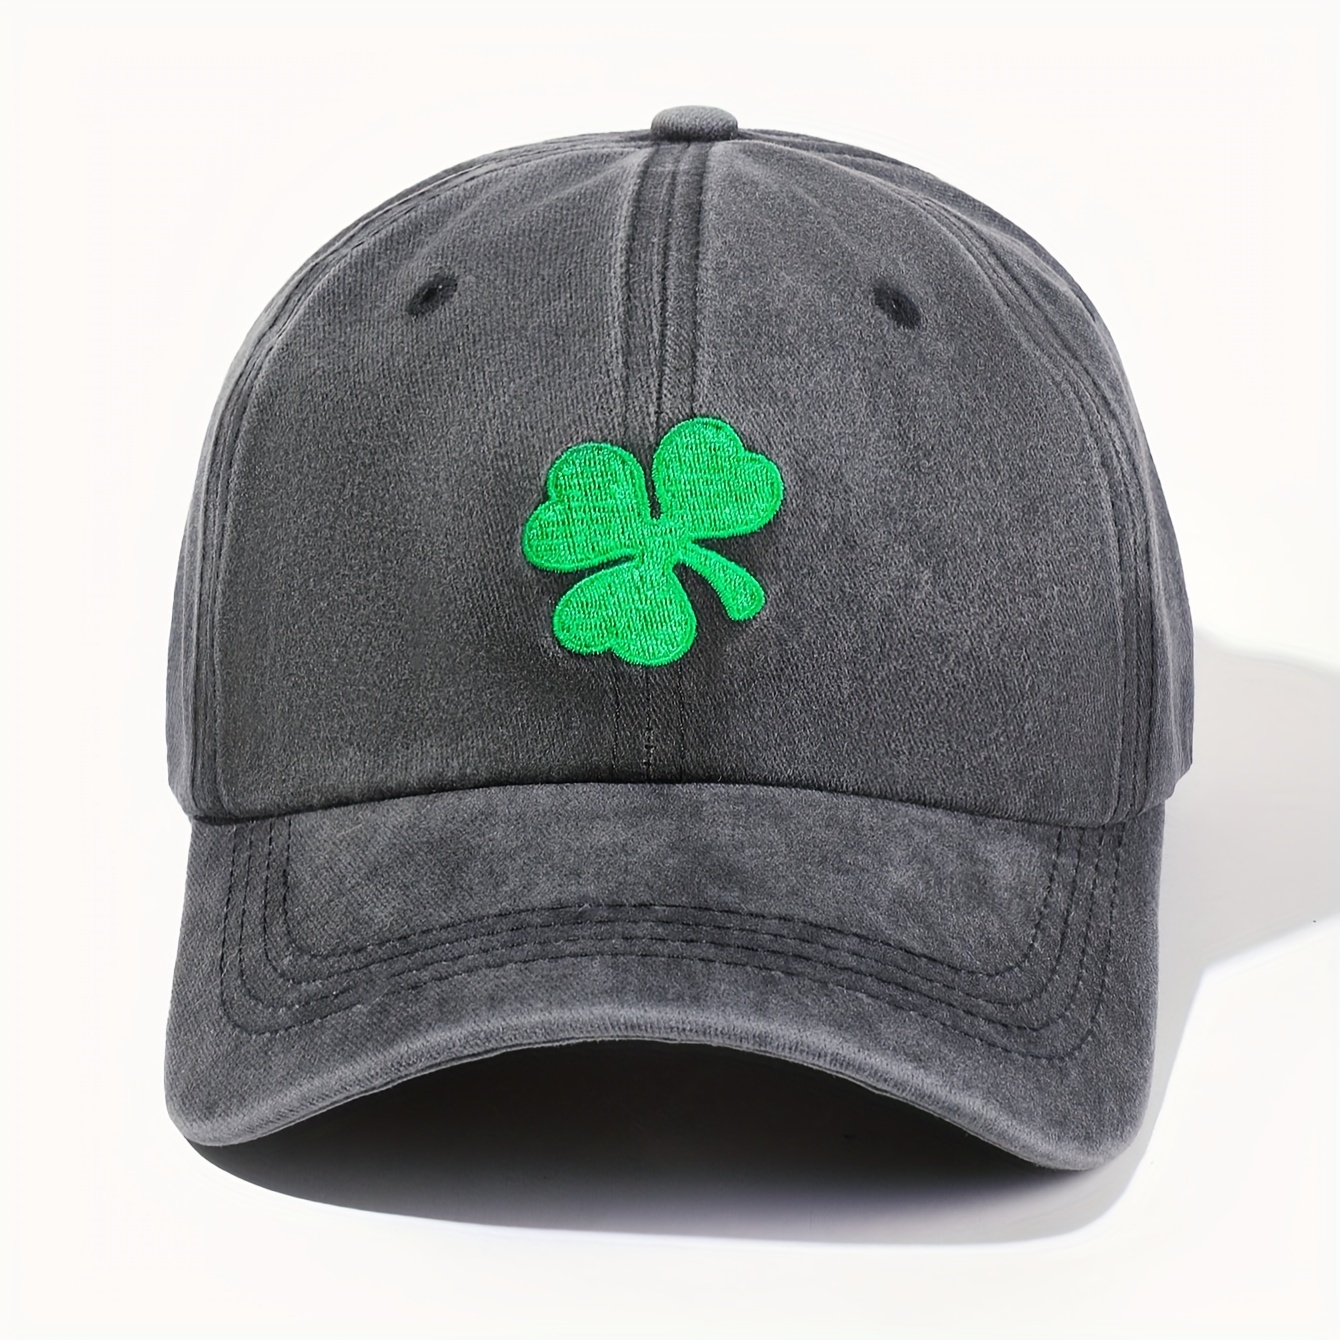 

Lucky Clover Embroidery Baseball Cap Gray Washed Distressed Dad Hats St. Patrick's Day Lightweight Adjustable Sun Hat For Women & Men